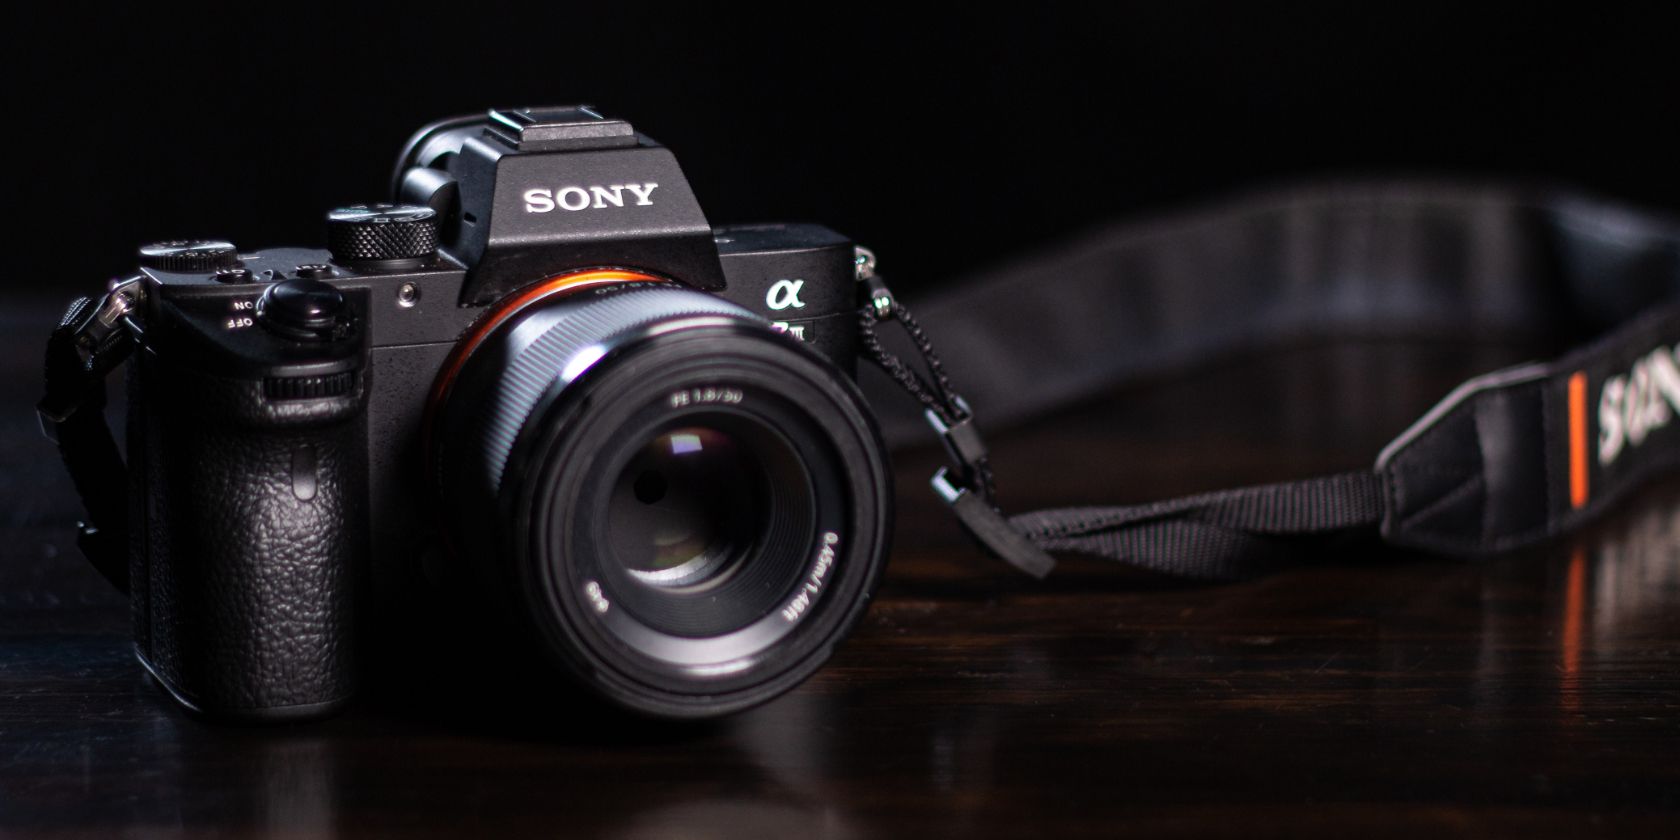 A close-up of a Sony DSLR camera with strap attached